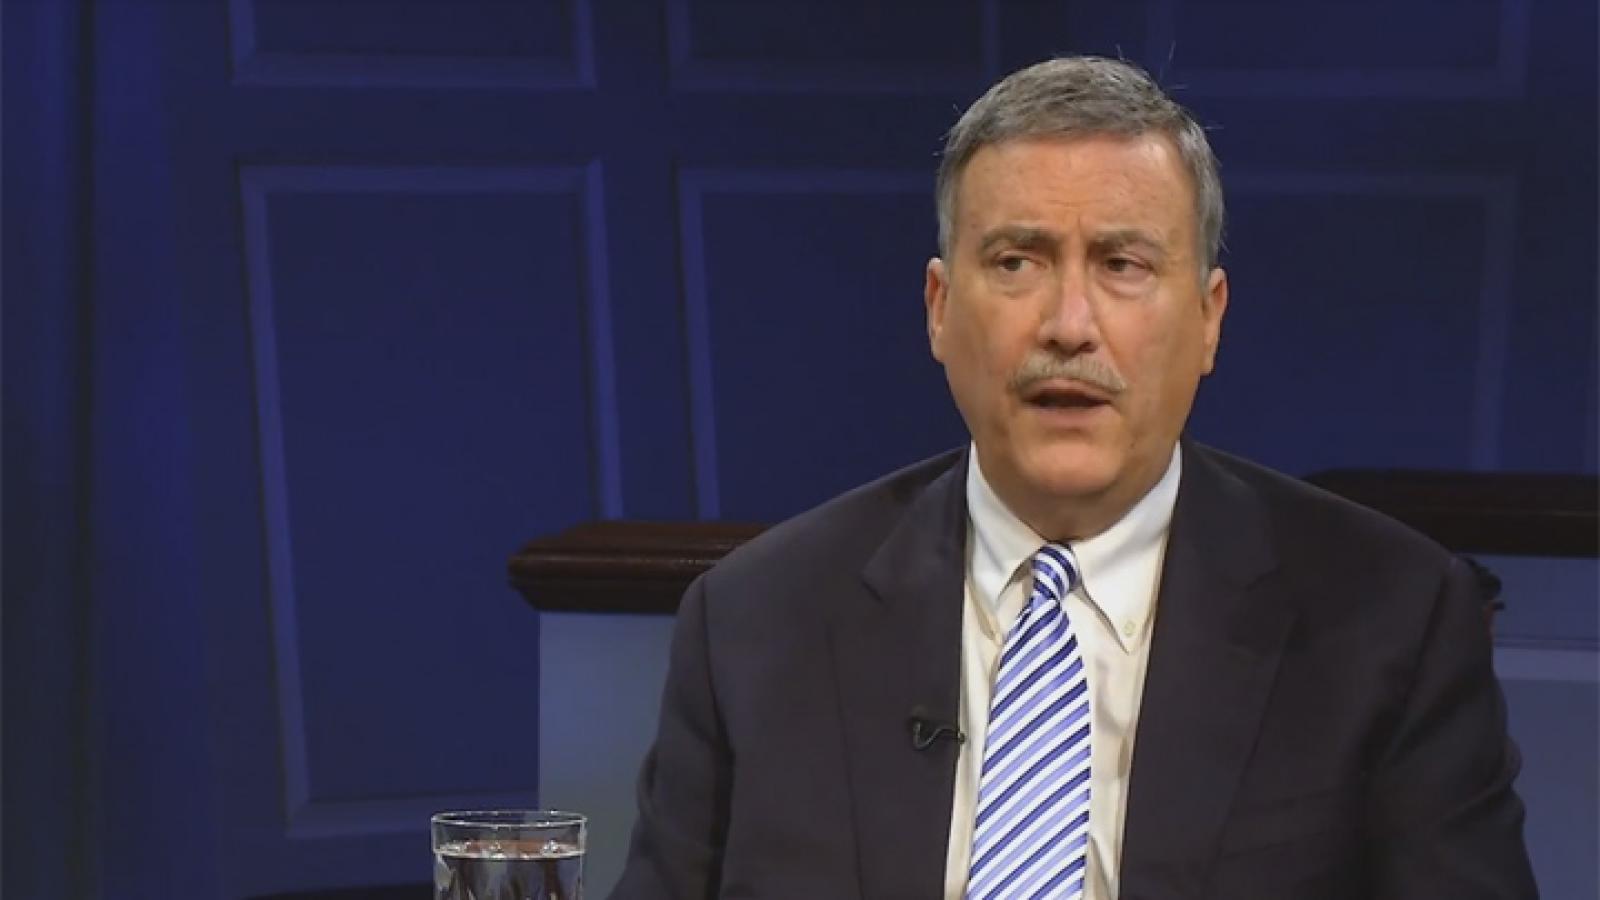 UVA's noted political prognosticator, Larry Sabato, says Hillary Clinton must inspire young and minority voters to win the 2016 election